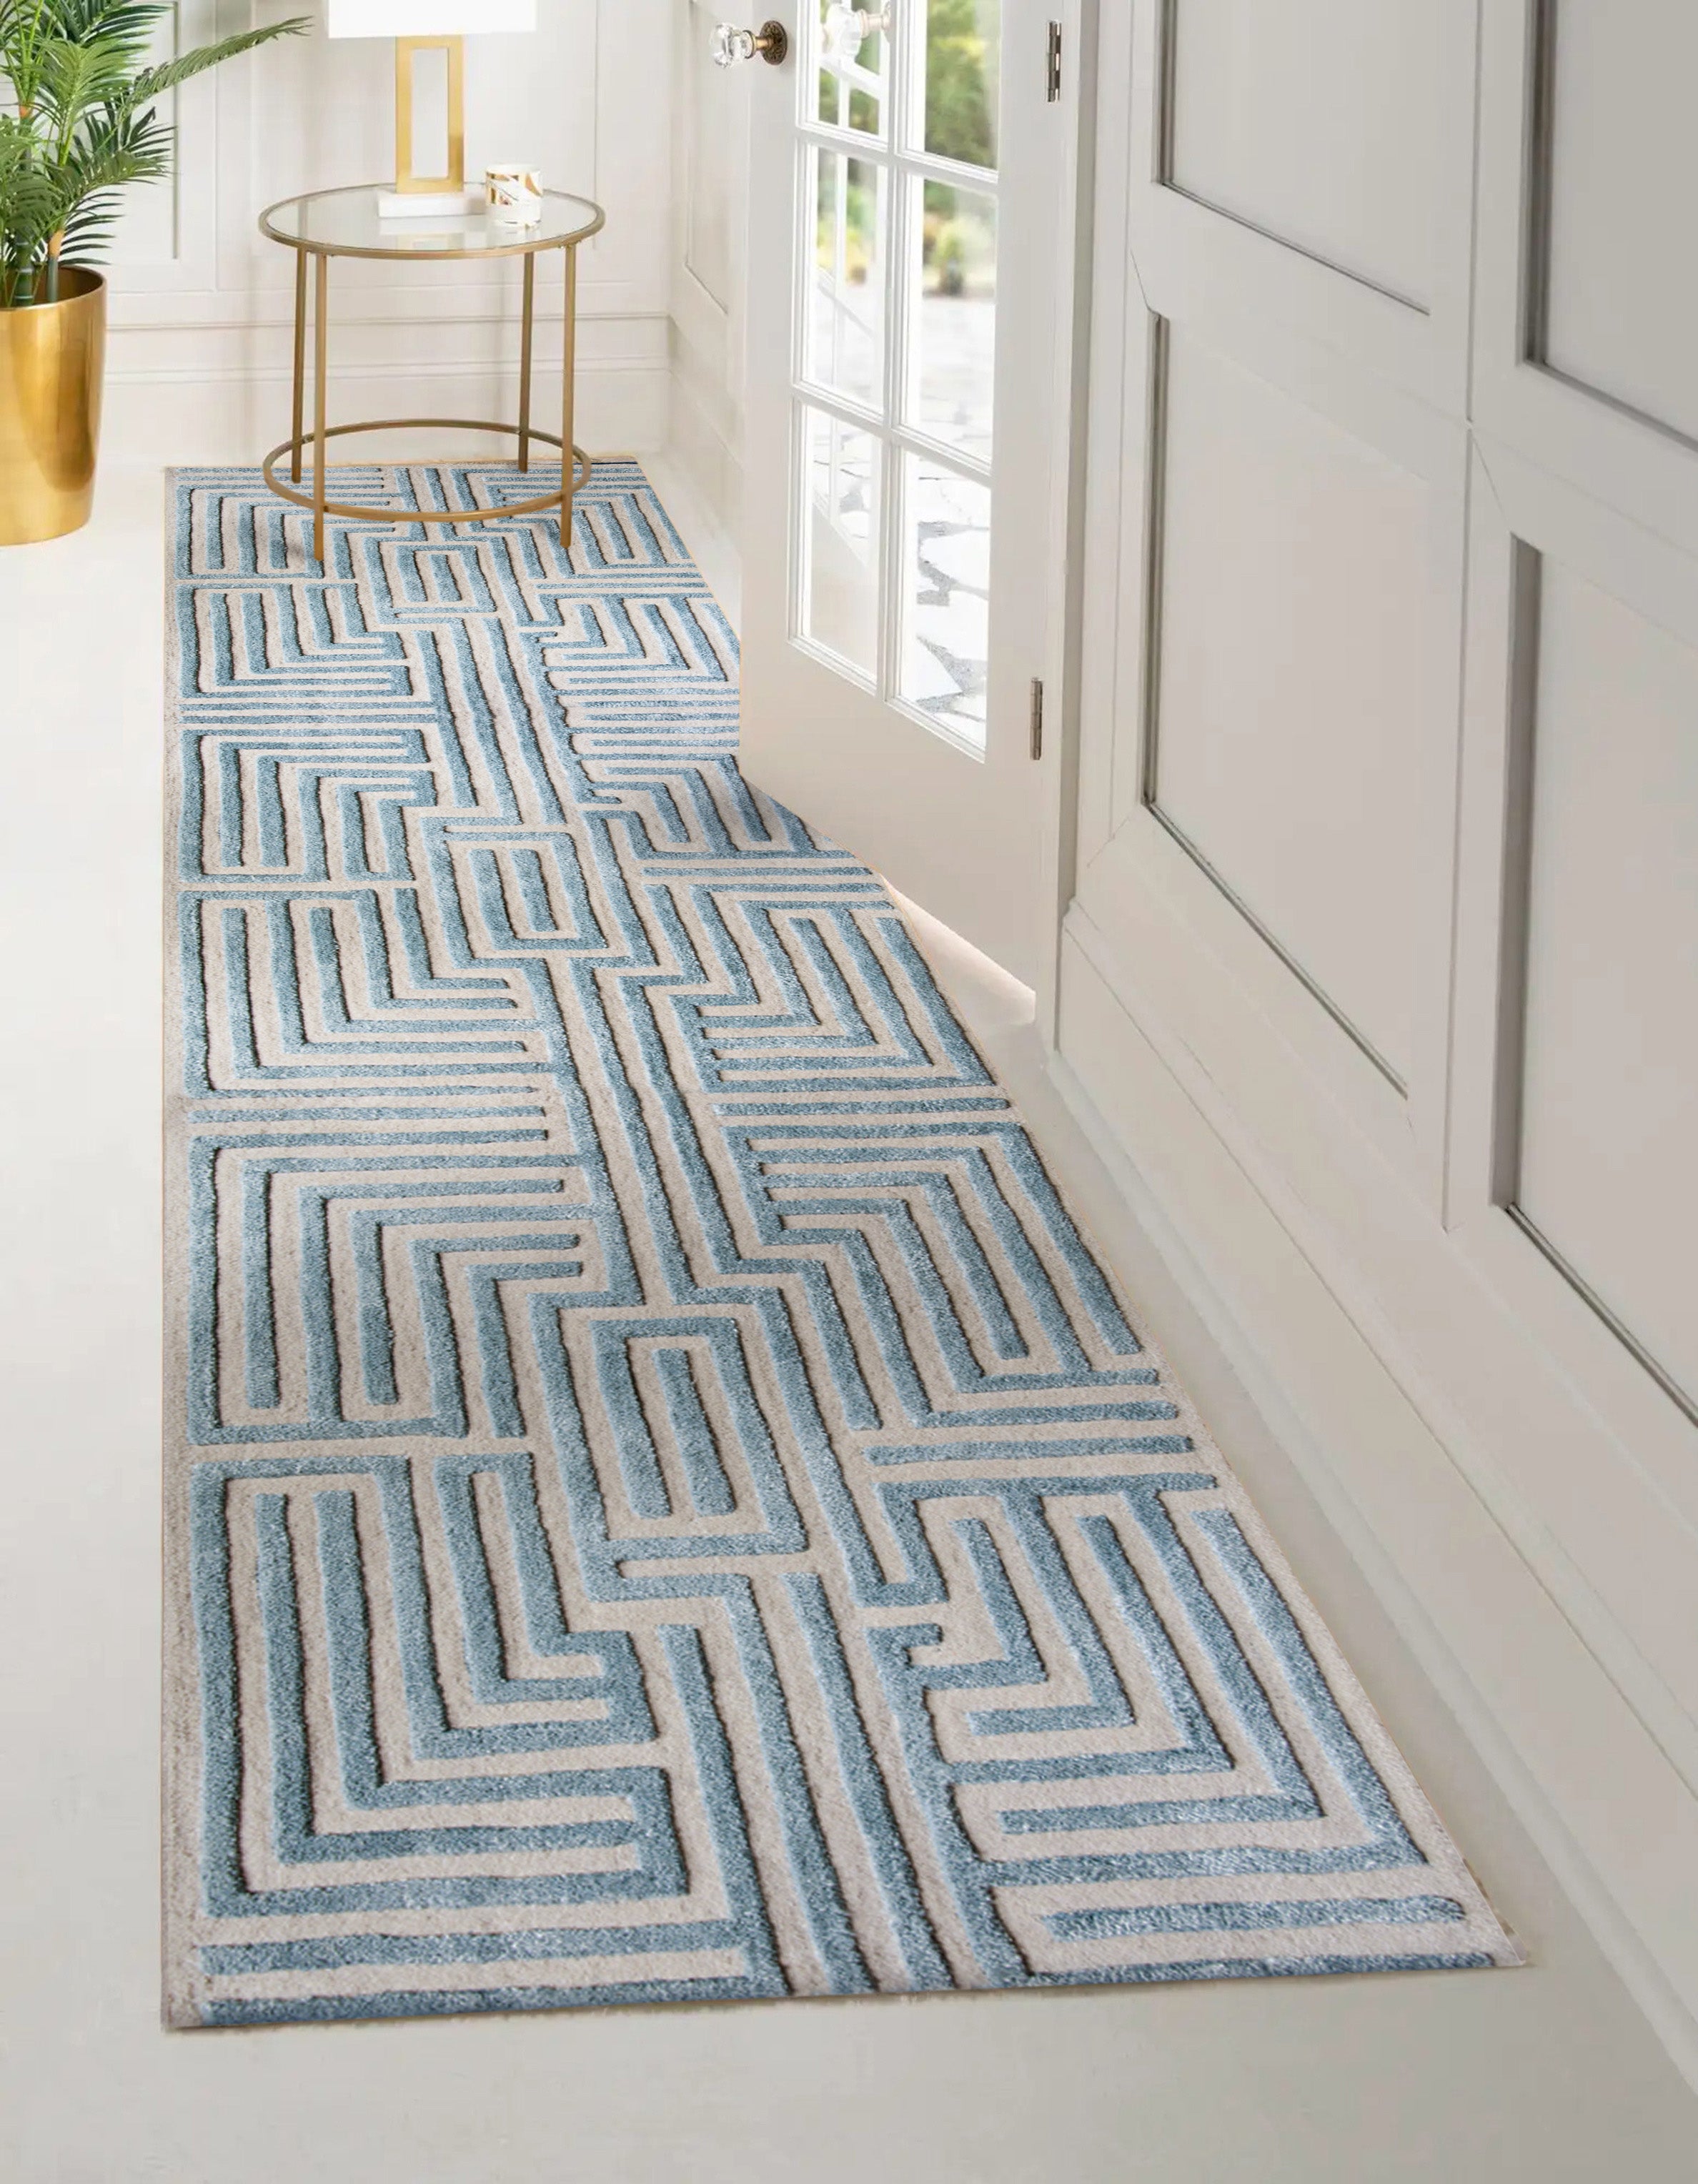 A 2.5x8 foot Knossos Hand-tufted maze rug in a hallway